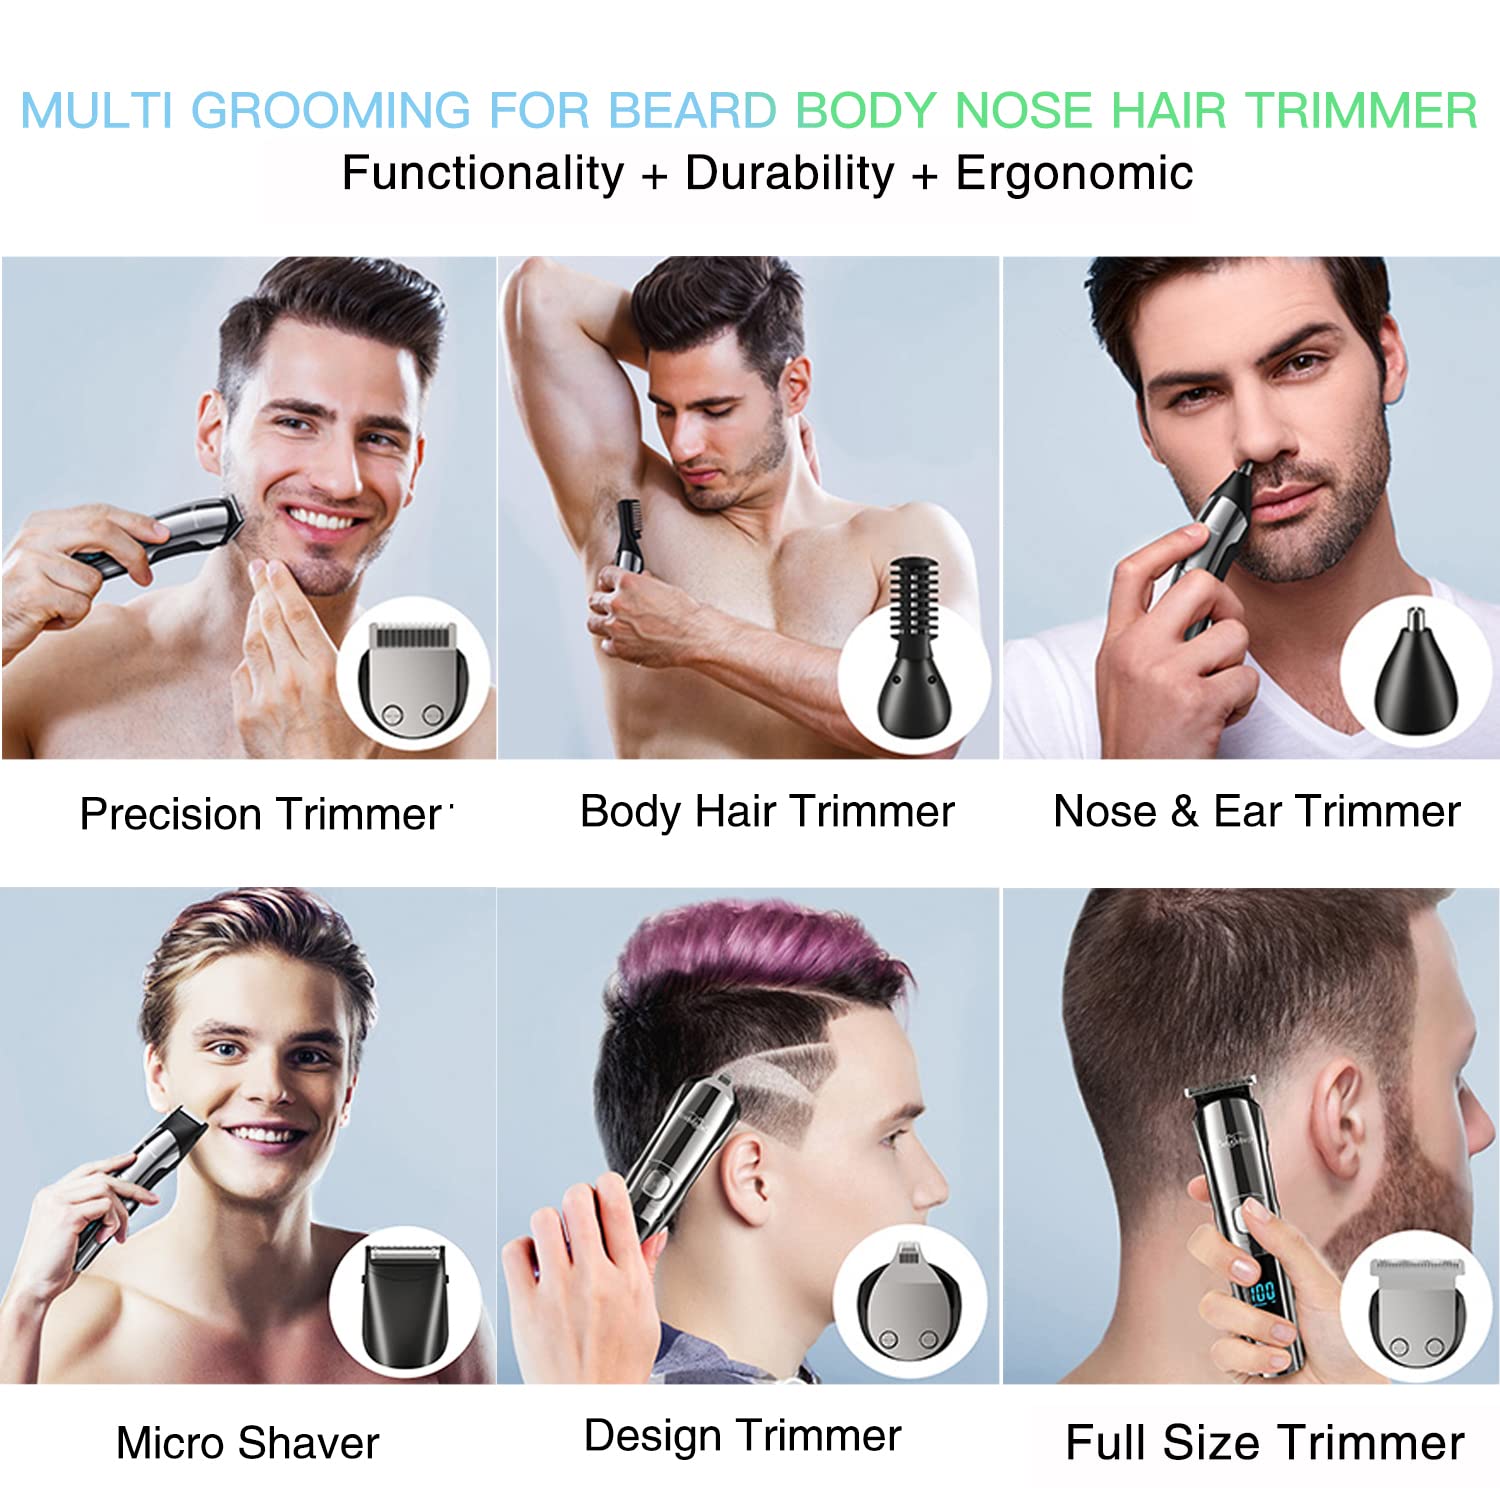 Brightup Beard Trimmer for Men - 19 Piece Beard Trimming Kit with Hair Clippers, Electric Razor - IPX7 Waterproof Mustache, Face, Nose, Ear, Balls, Body Shavers - Ideal Gifts, FK-8688T